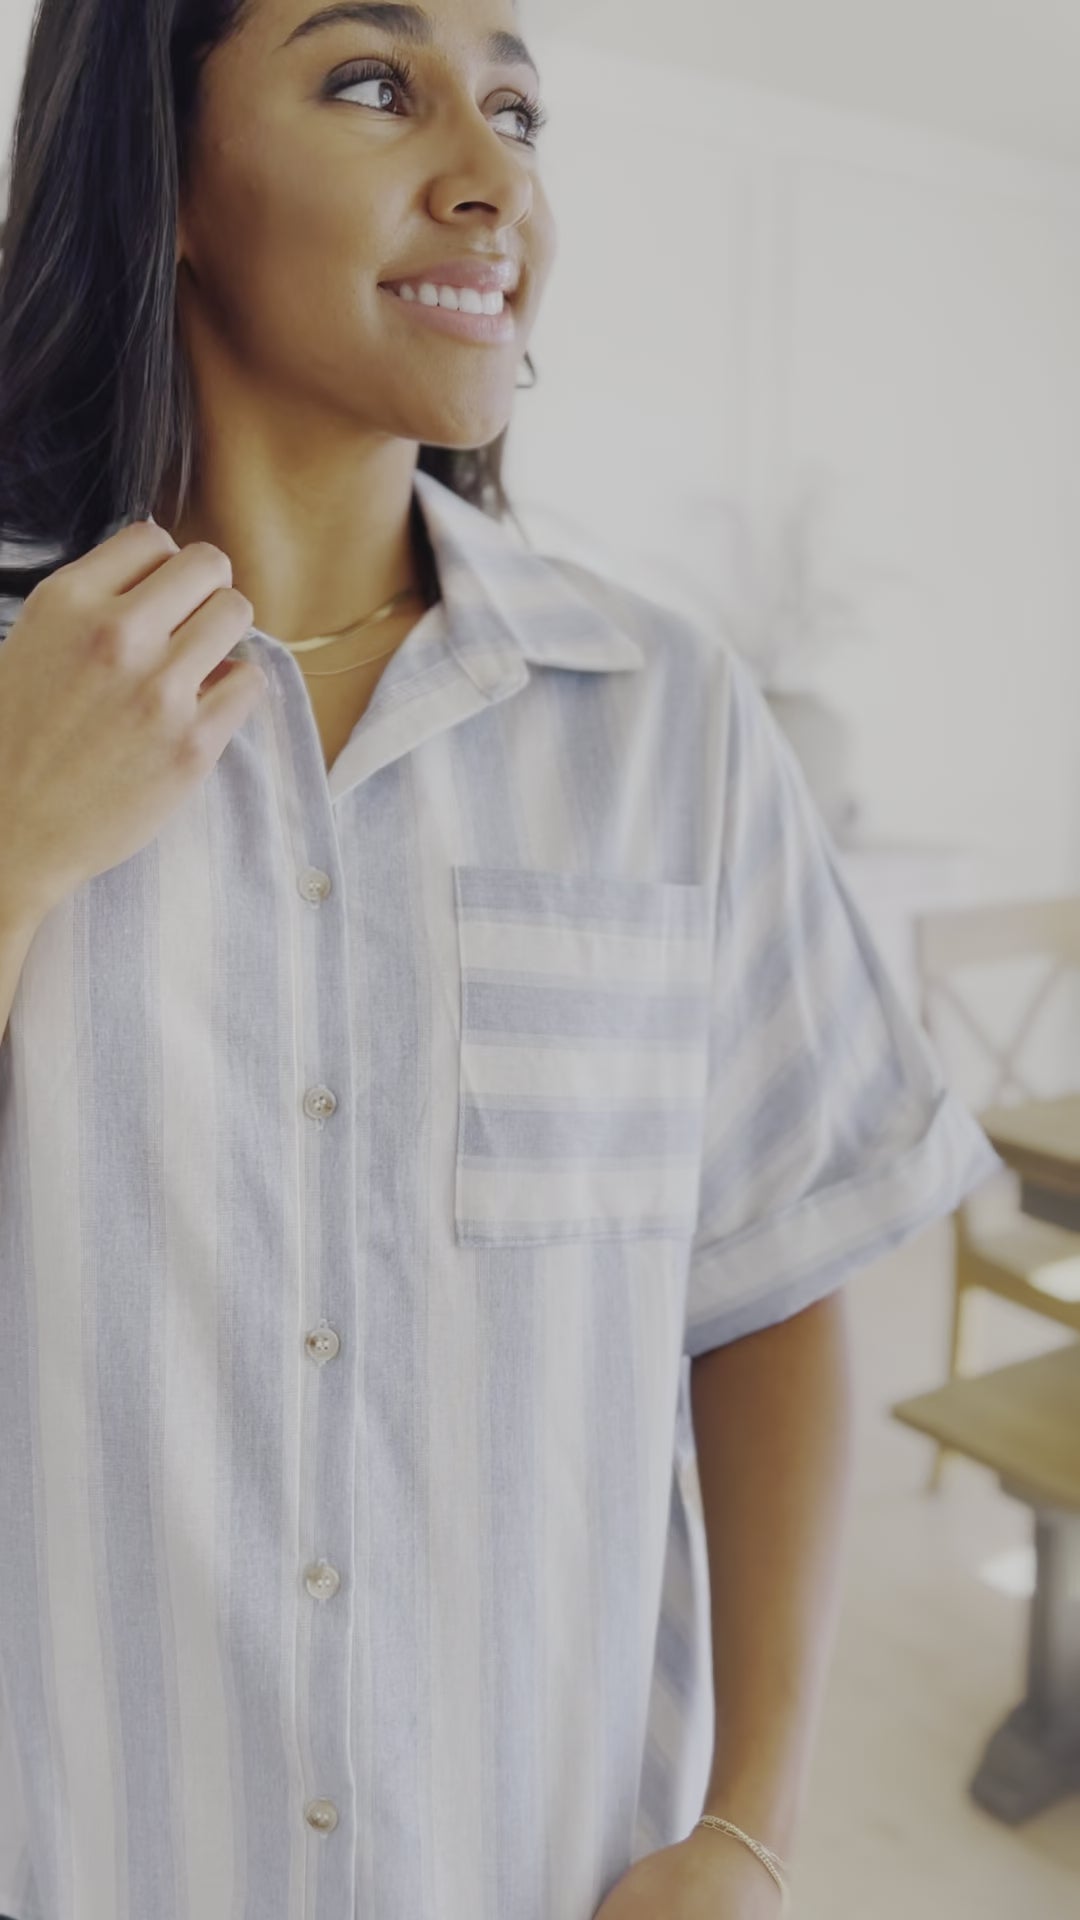 Tailored to Relax Striped Button Down